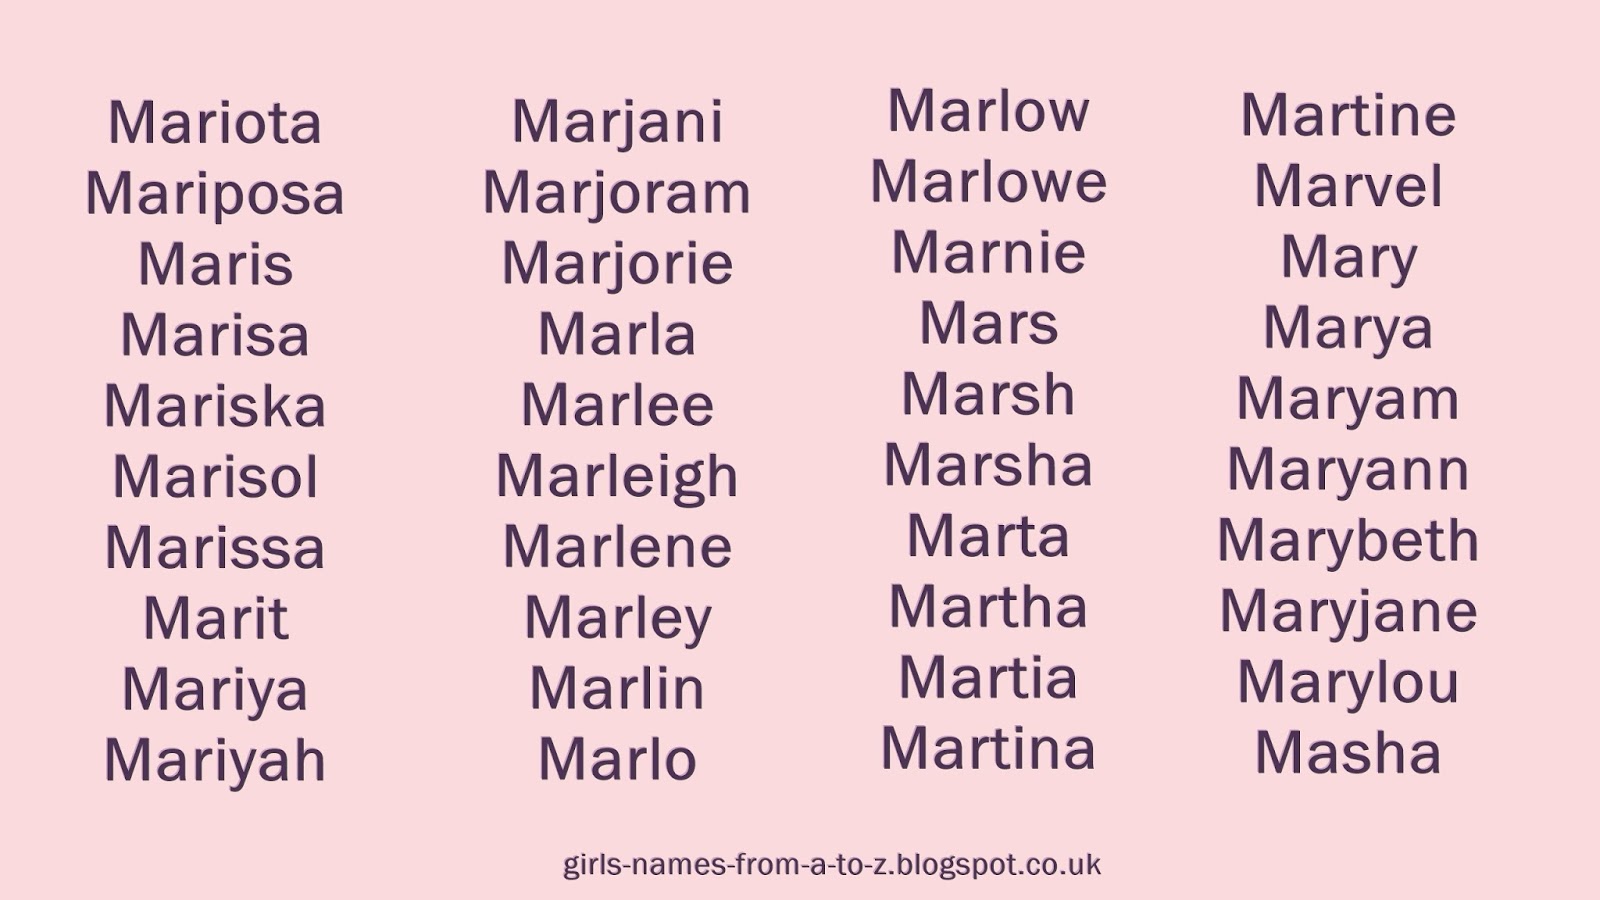 Girls Names From A To Z: Girls Names Starting With M